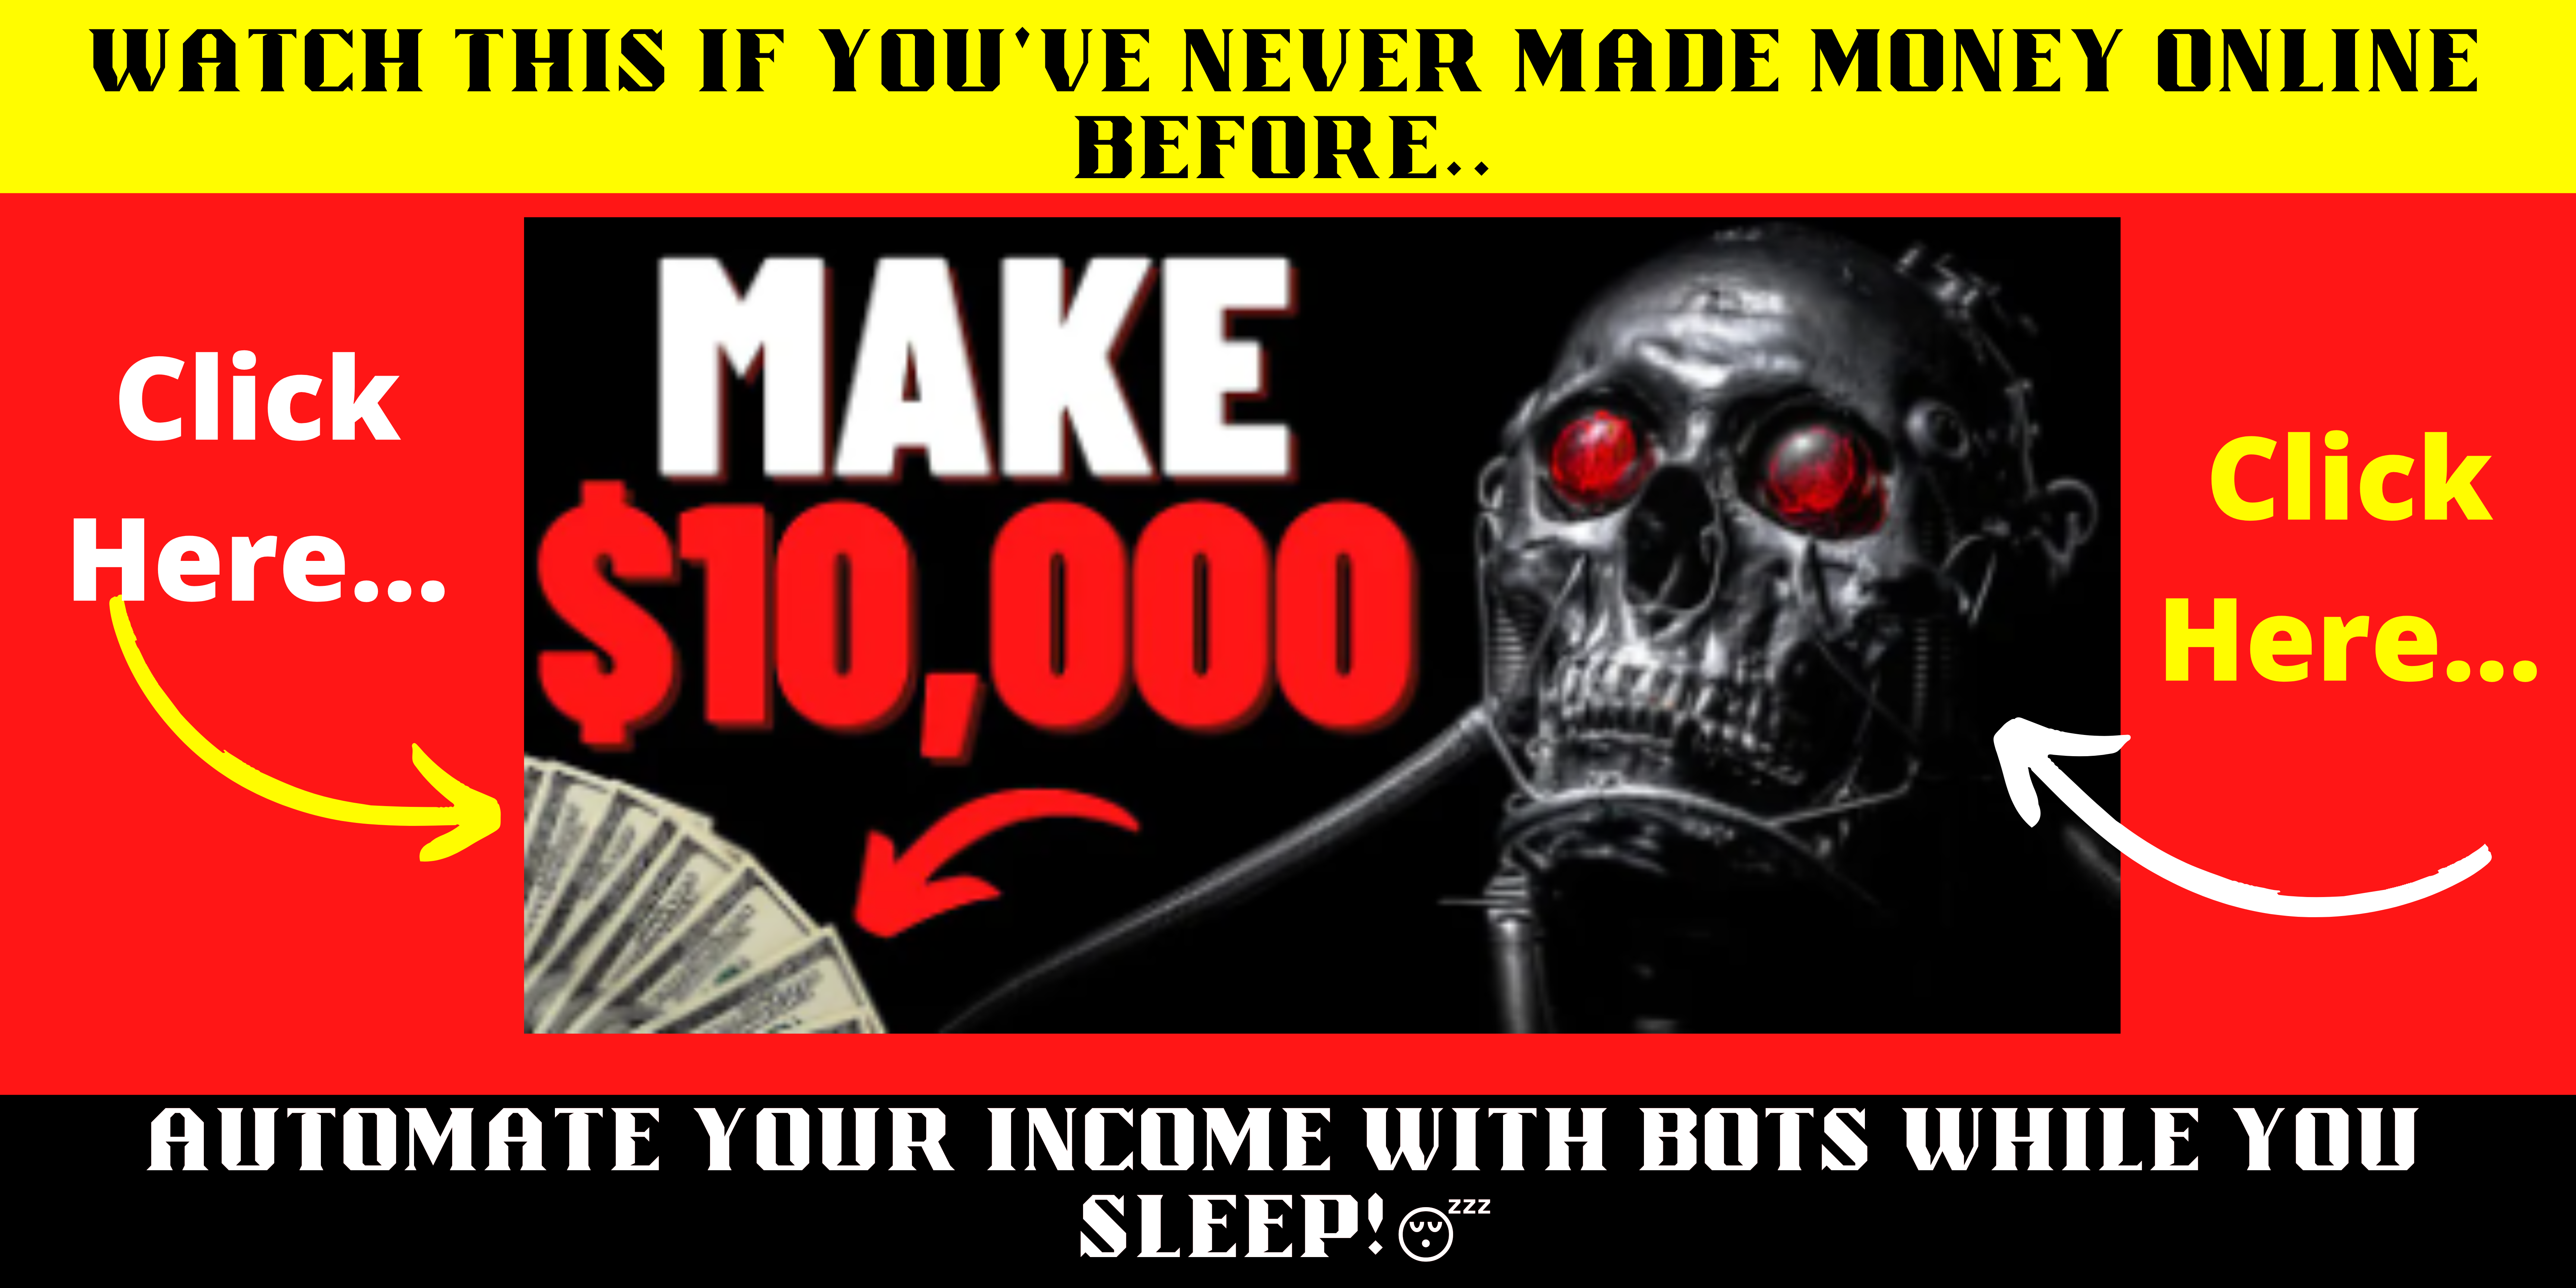 AUTOMATE YOUR INCOME WITH BOTS WHILE YOU SLEEP😴 1